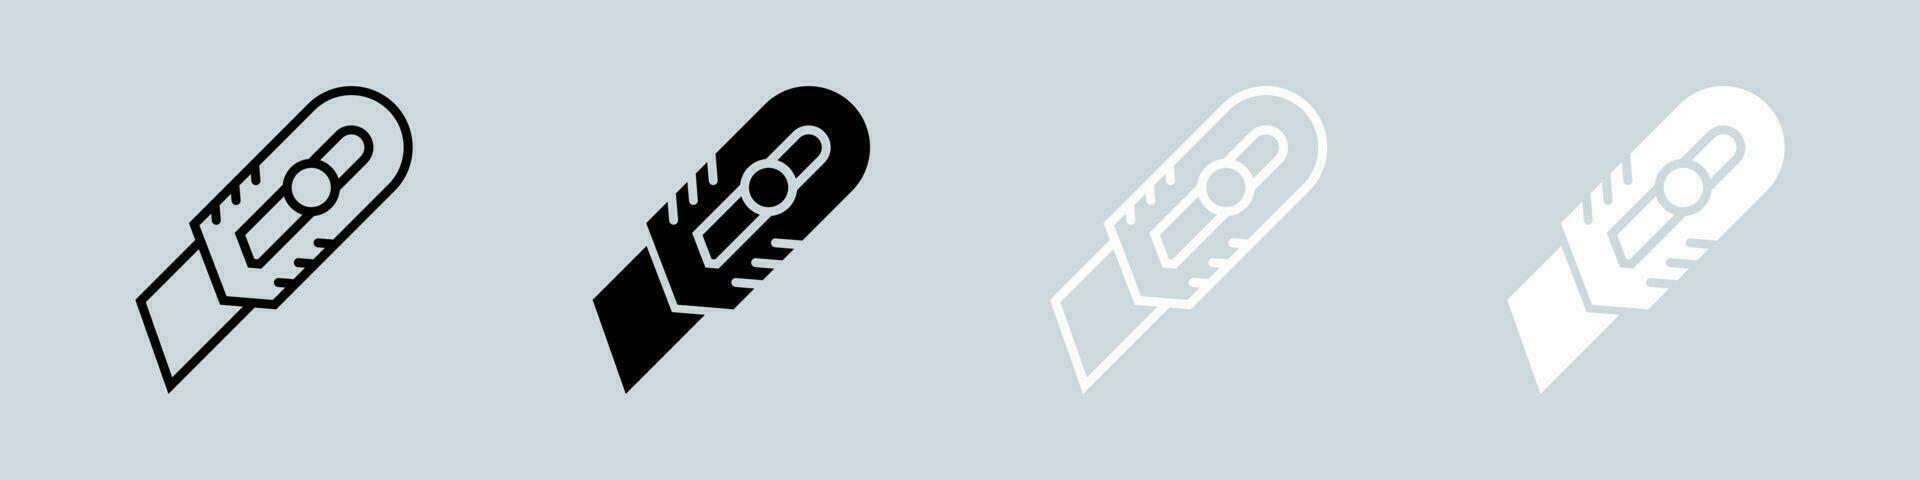 Cutter icon set in black and white. Tool signs vector illustration.